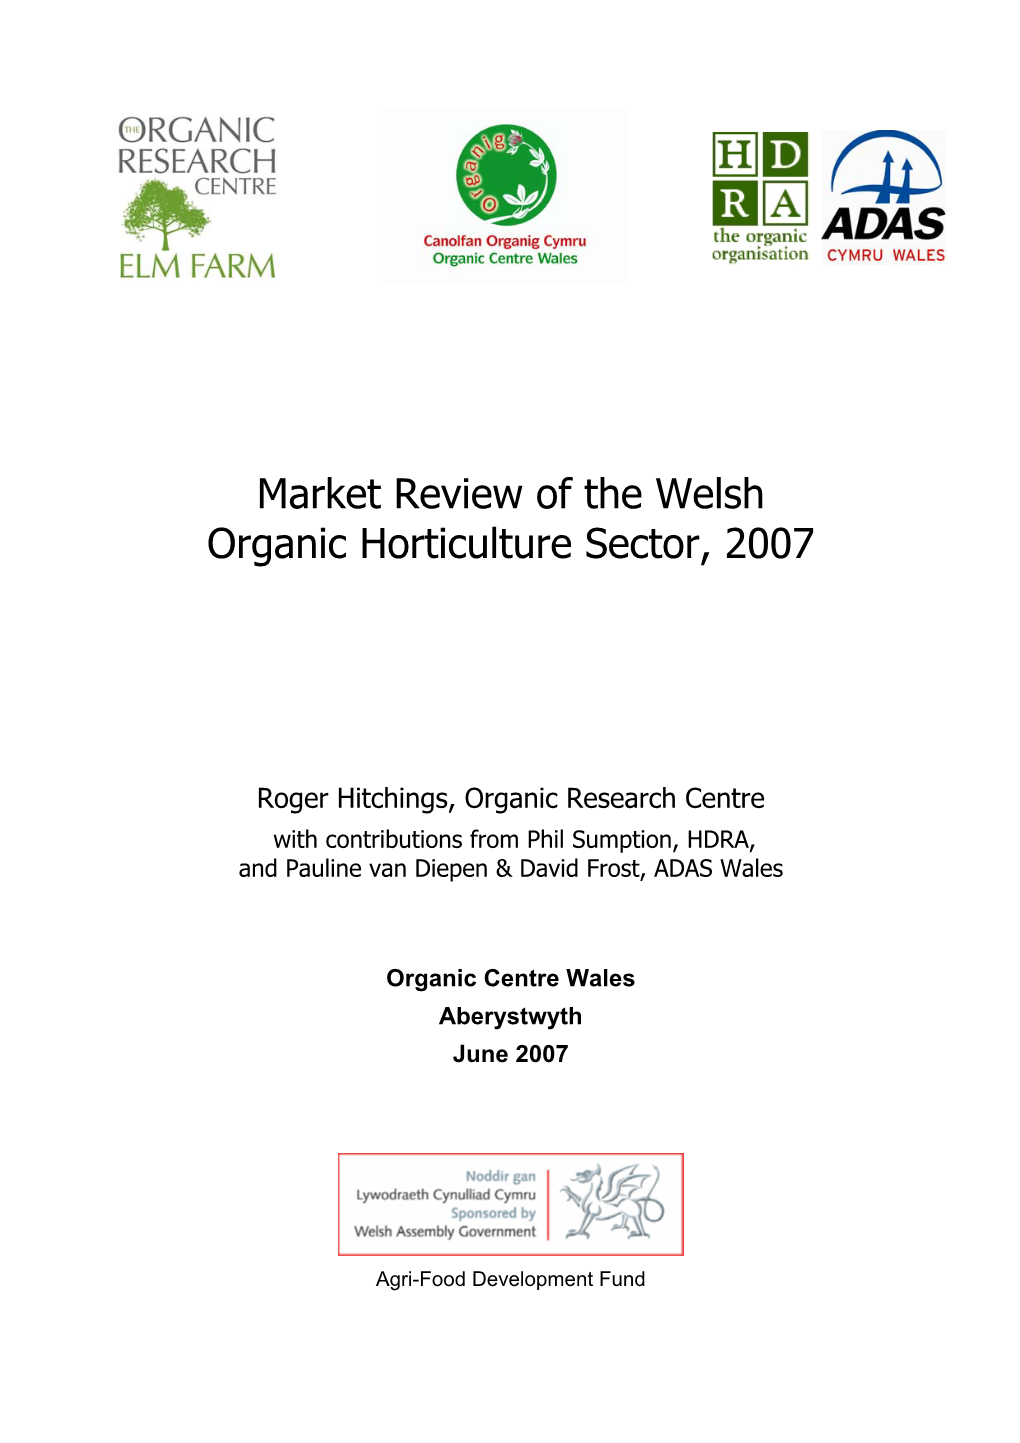 Market Review of the Welsh Organic Horticulture Sector, 2007